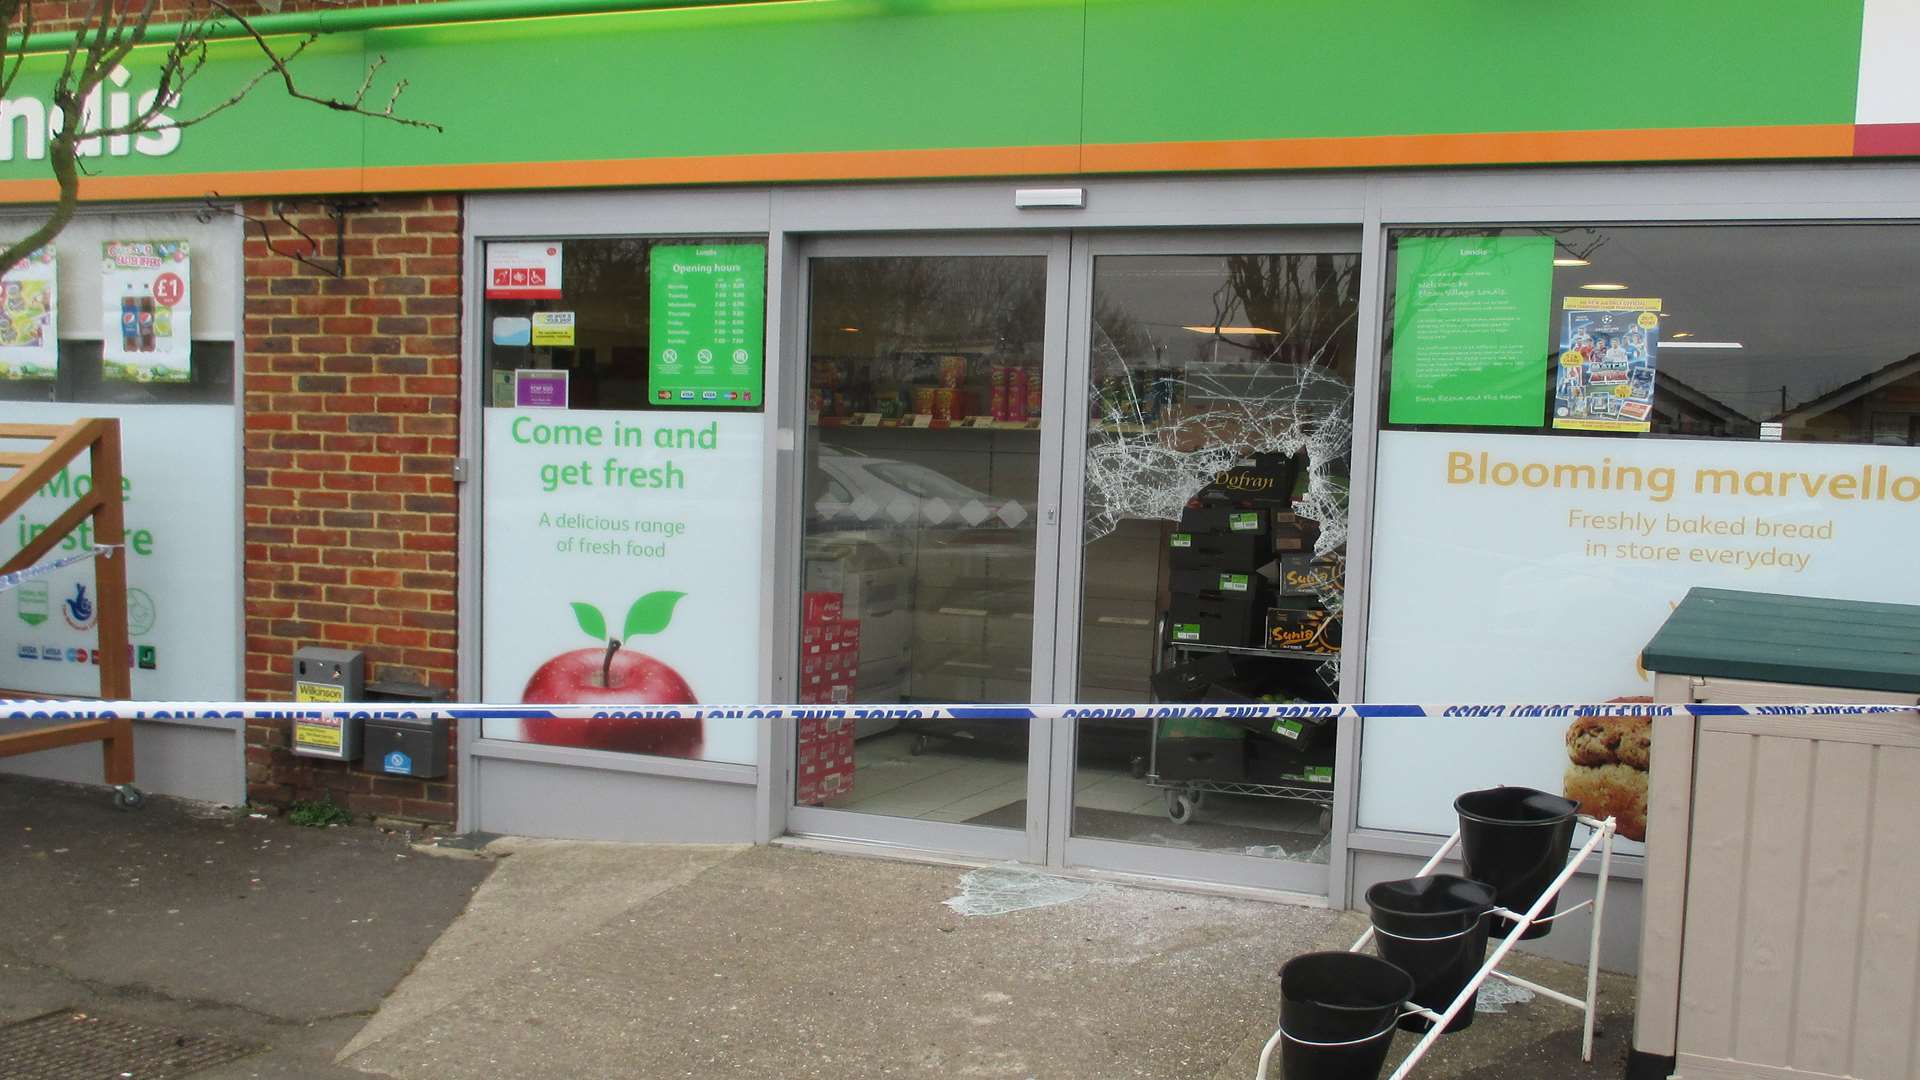 The front doors of the Londis shop in Blean were smashed by burglars who stole cigarettes and alcohol.